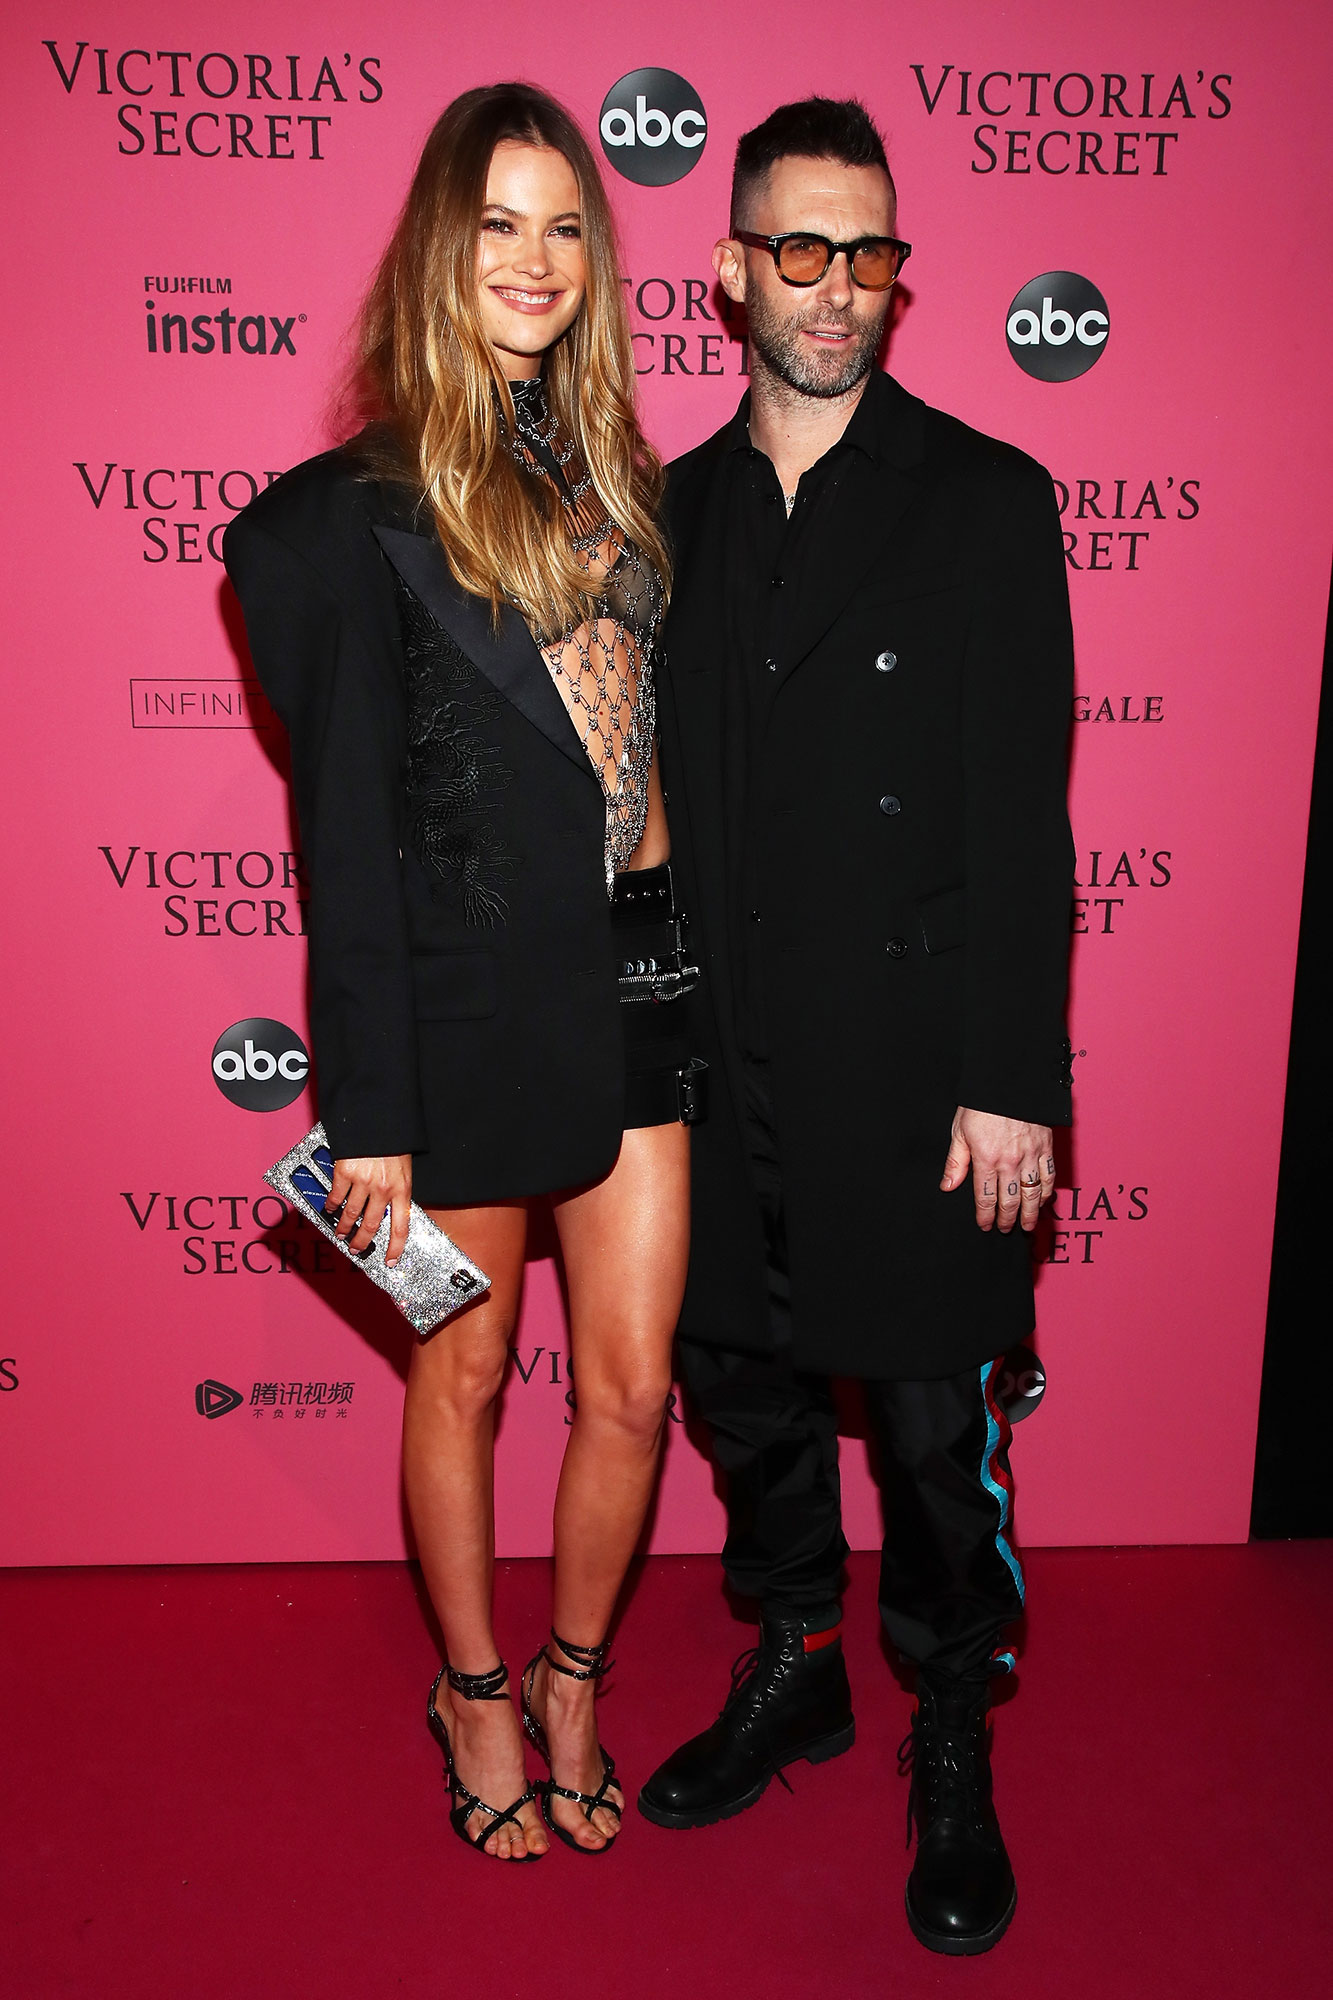 Behati Prinsloo on Fashion, Swapping Clothes With Adam Levine